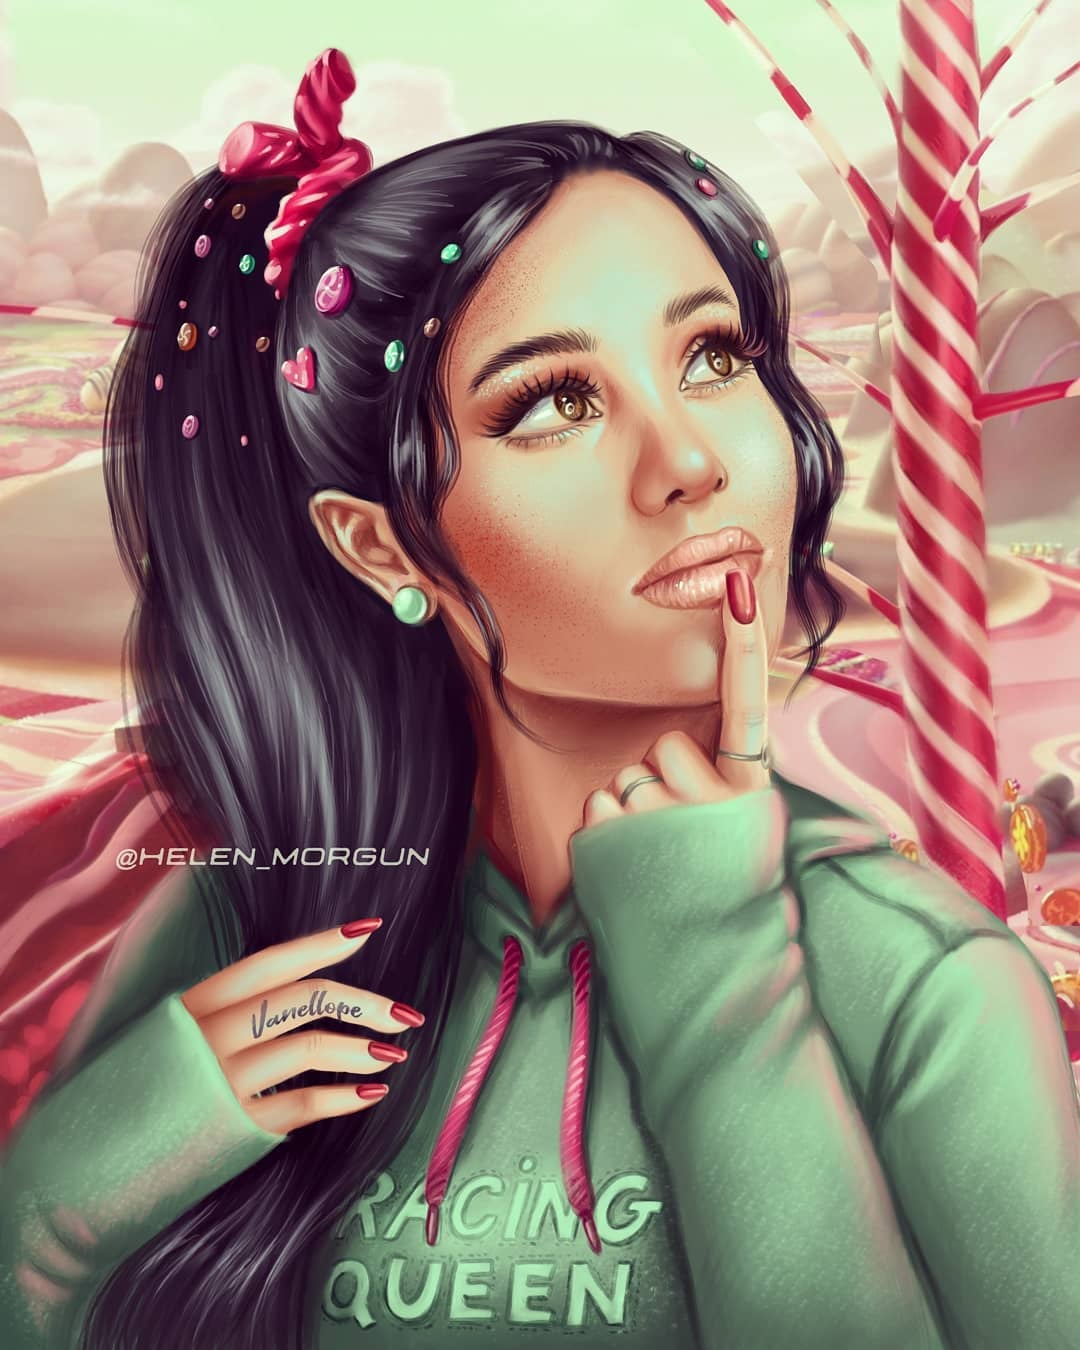 Ariana Grande As Vanellope Your Favorite Celebrities Are Reimagined As Disney Princesses In This Stunning Art Popsugar Smart Living Photo 15